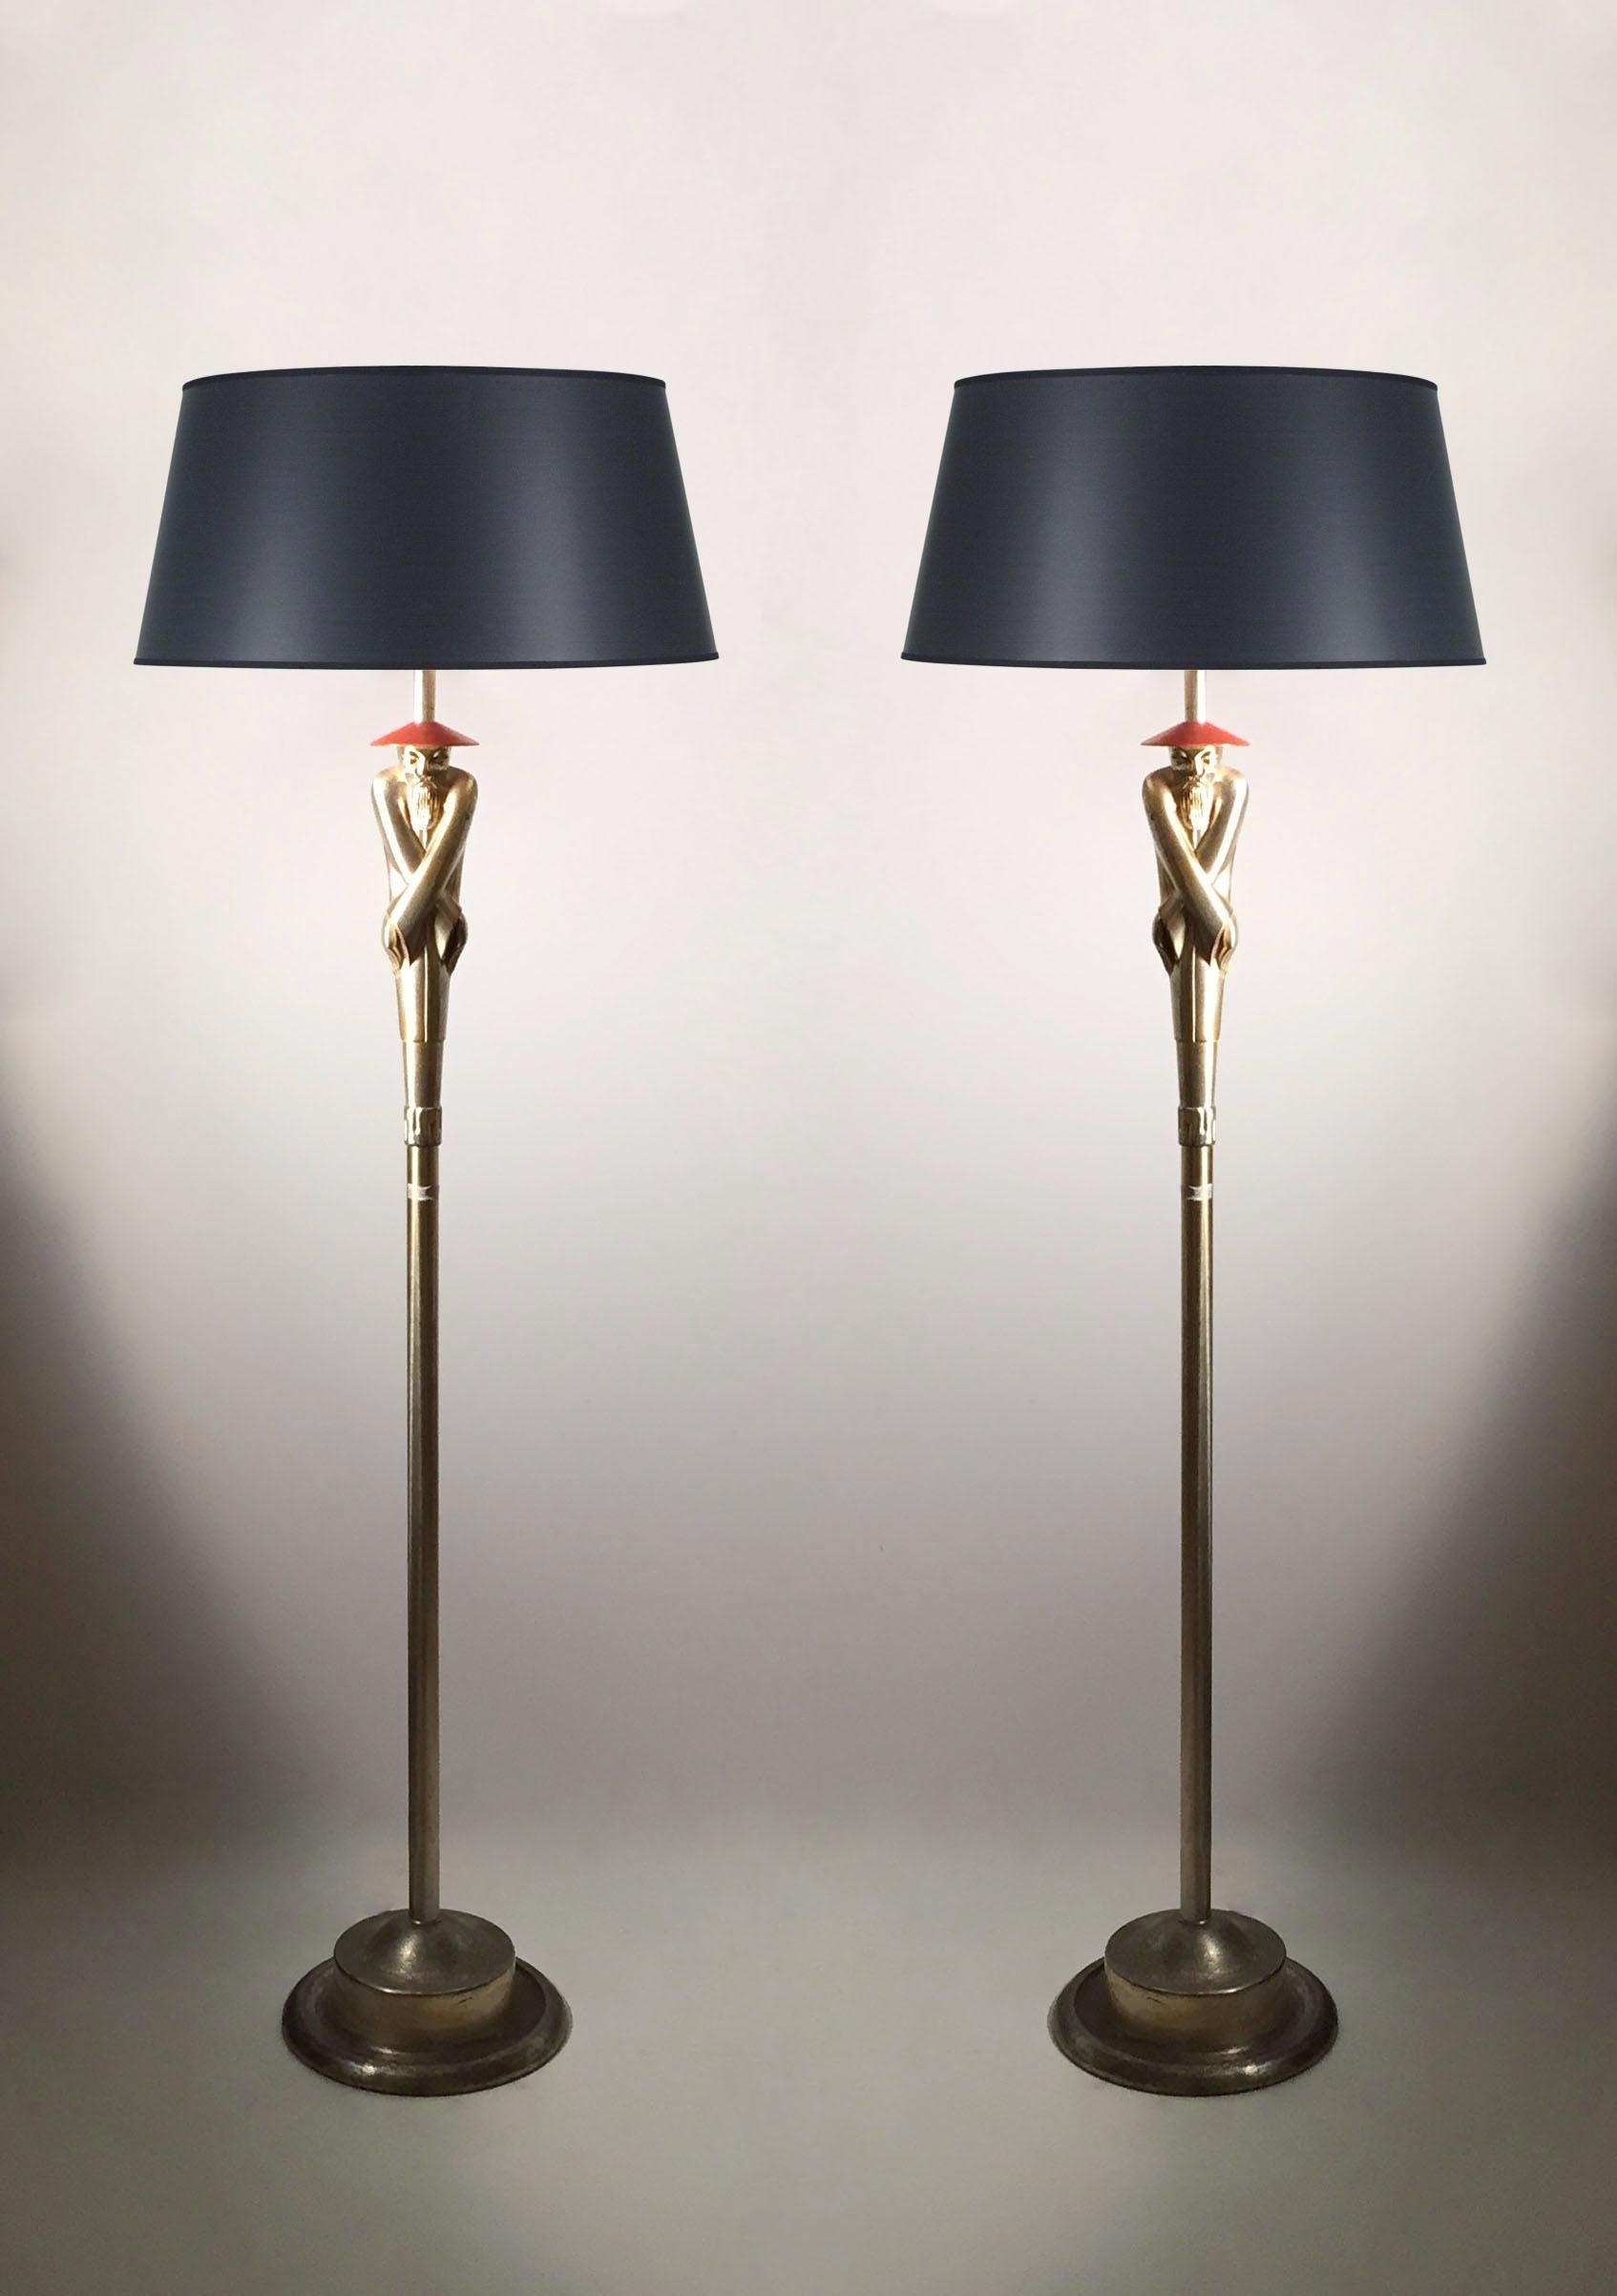 Pair of Vintage Deco Viktor Schreckengost Chinoiserie Floor Lamp

A really nice period example of this stylized chinoiserie design. Comes with a original coral color shade with oversized piping design. In the manner of Hollywood Regency and Oriental